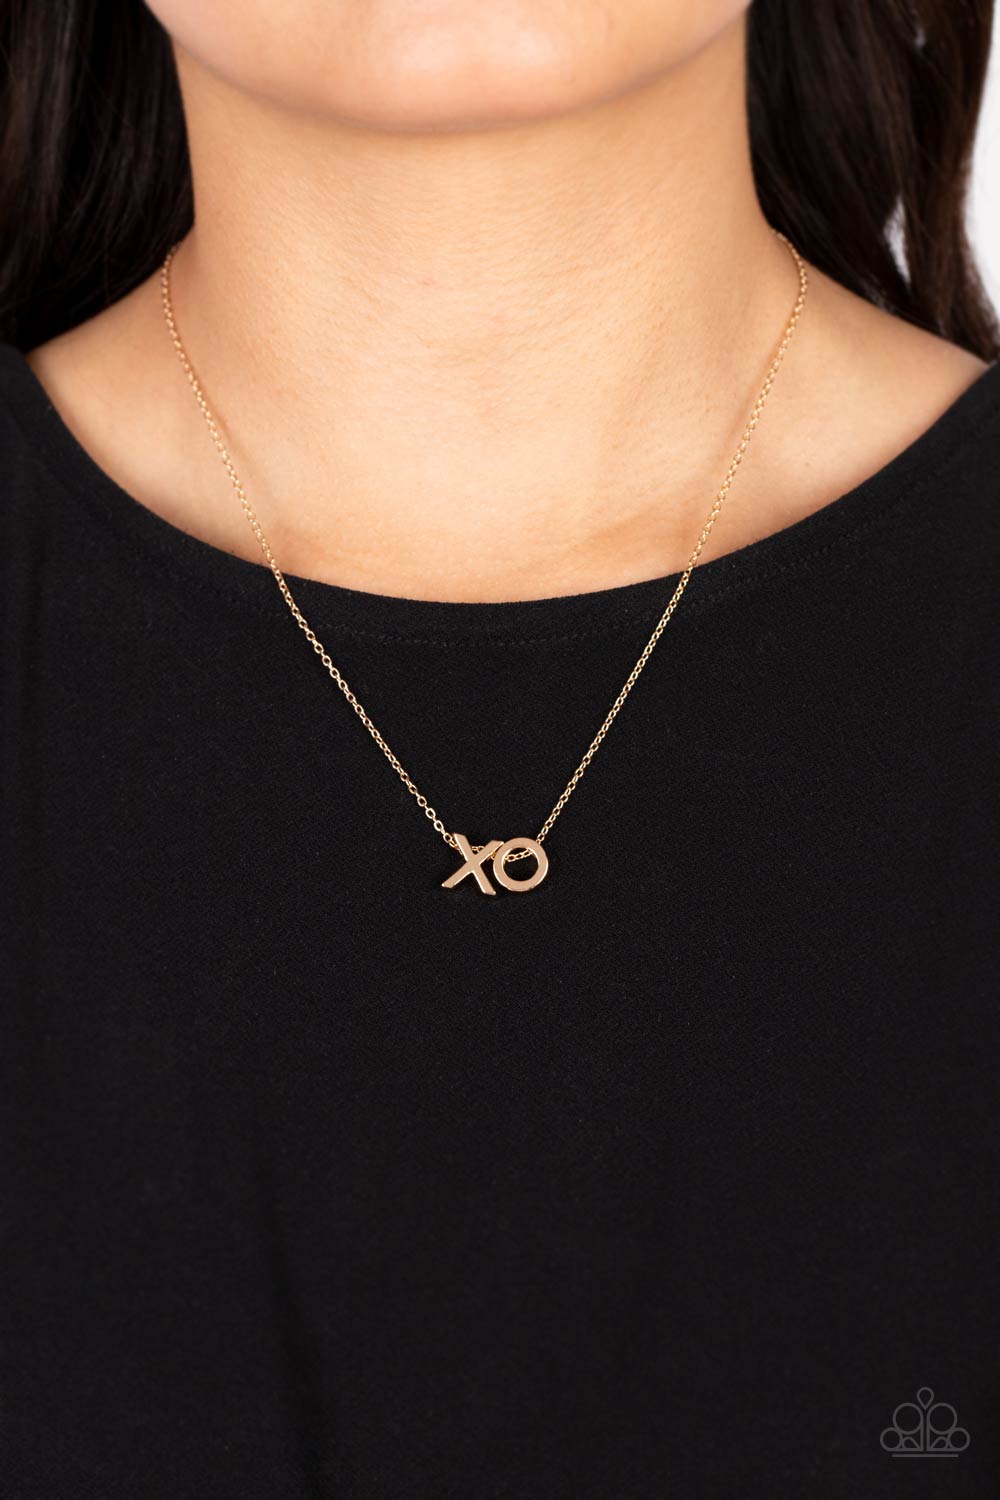 Hugs and Kisses - Gold "X" and "O" Letter Paparazzi Necklace & matching earrings